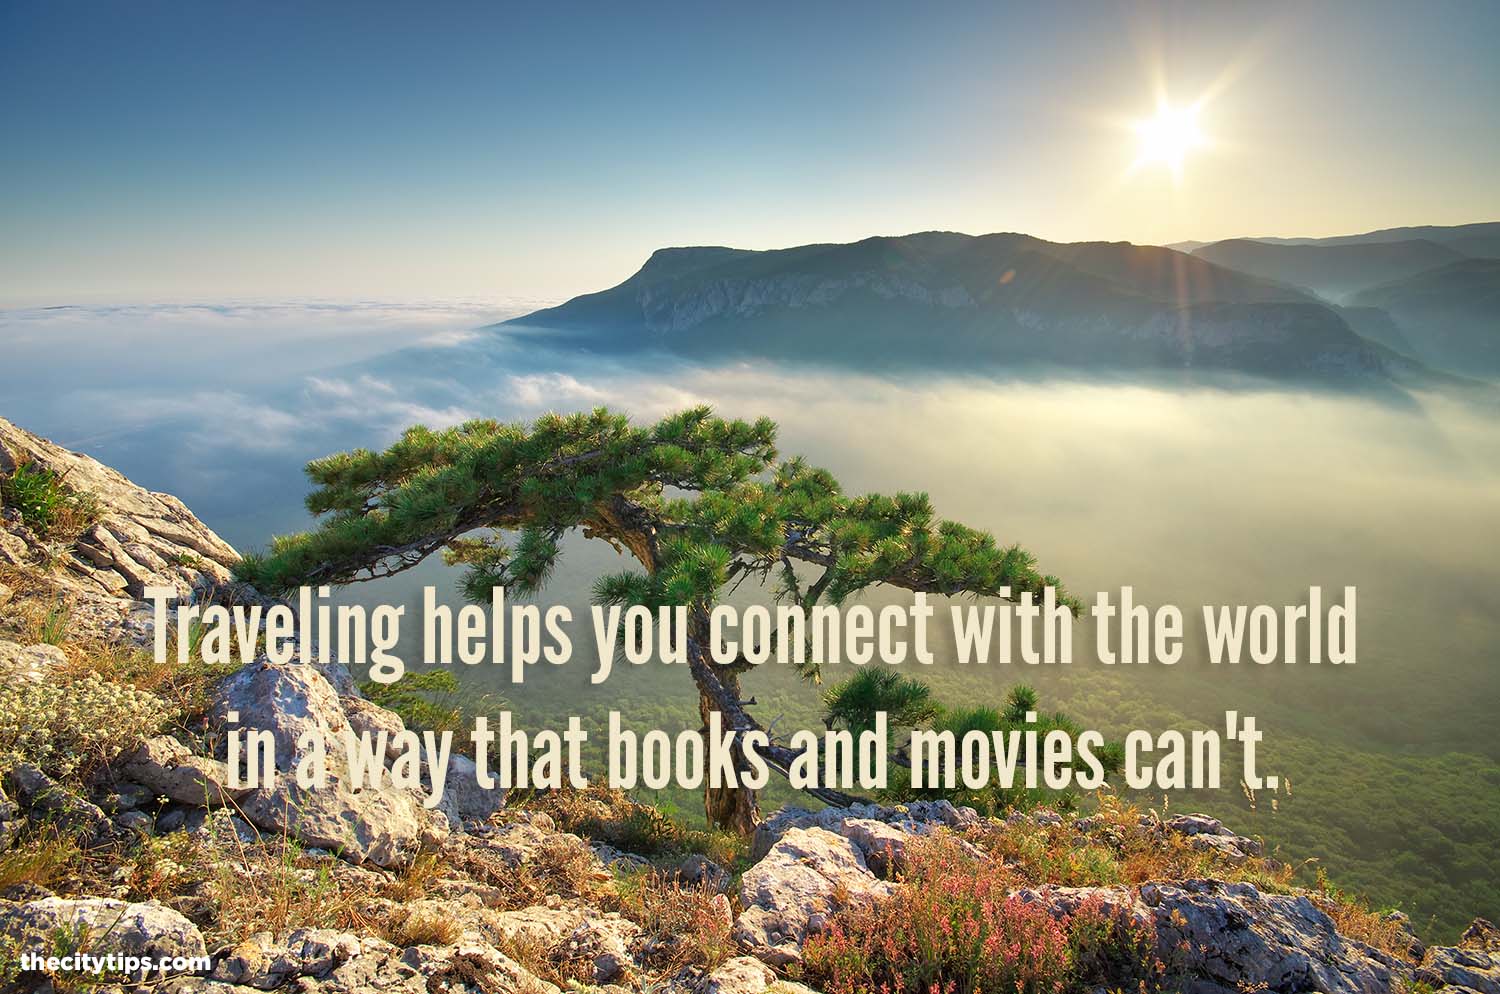 "Traveling helps you connect with the world in a way that books and movies can't." by Anonymous